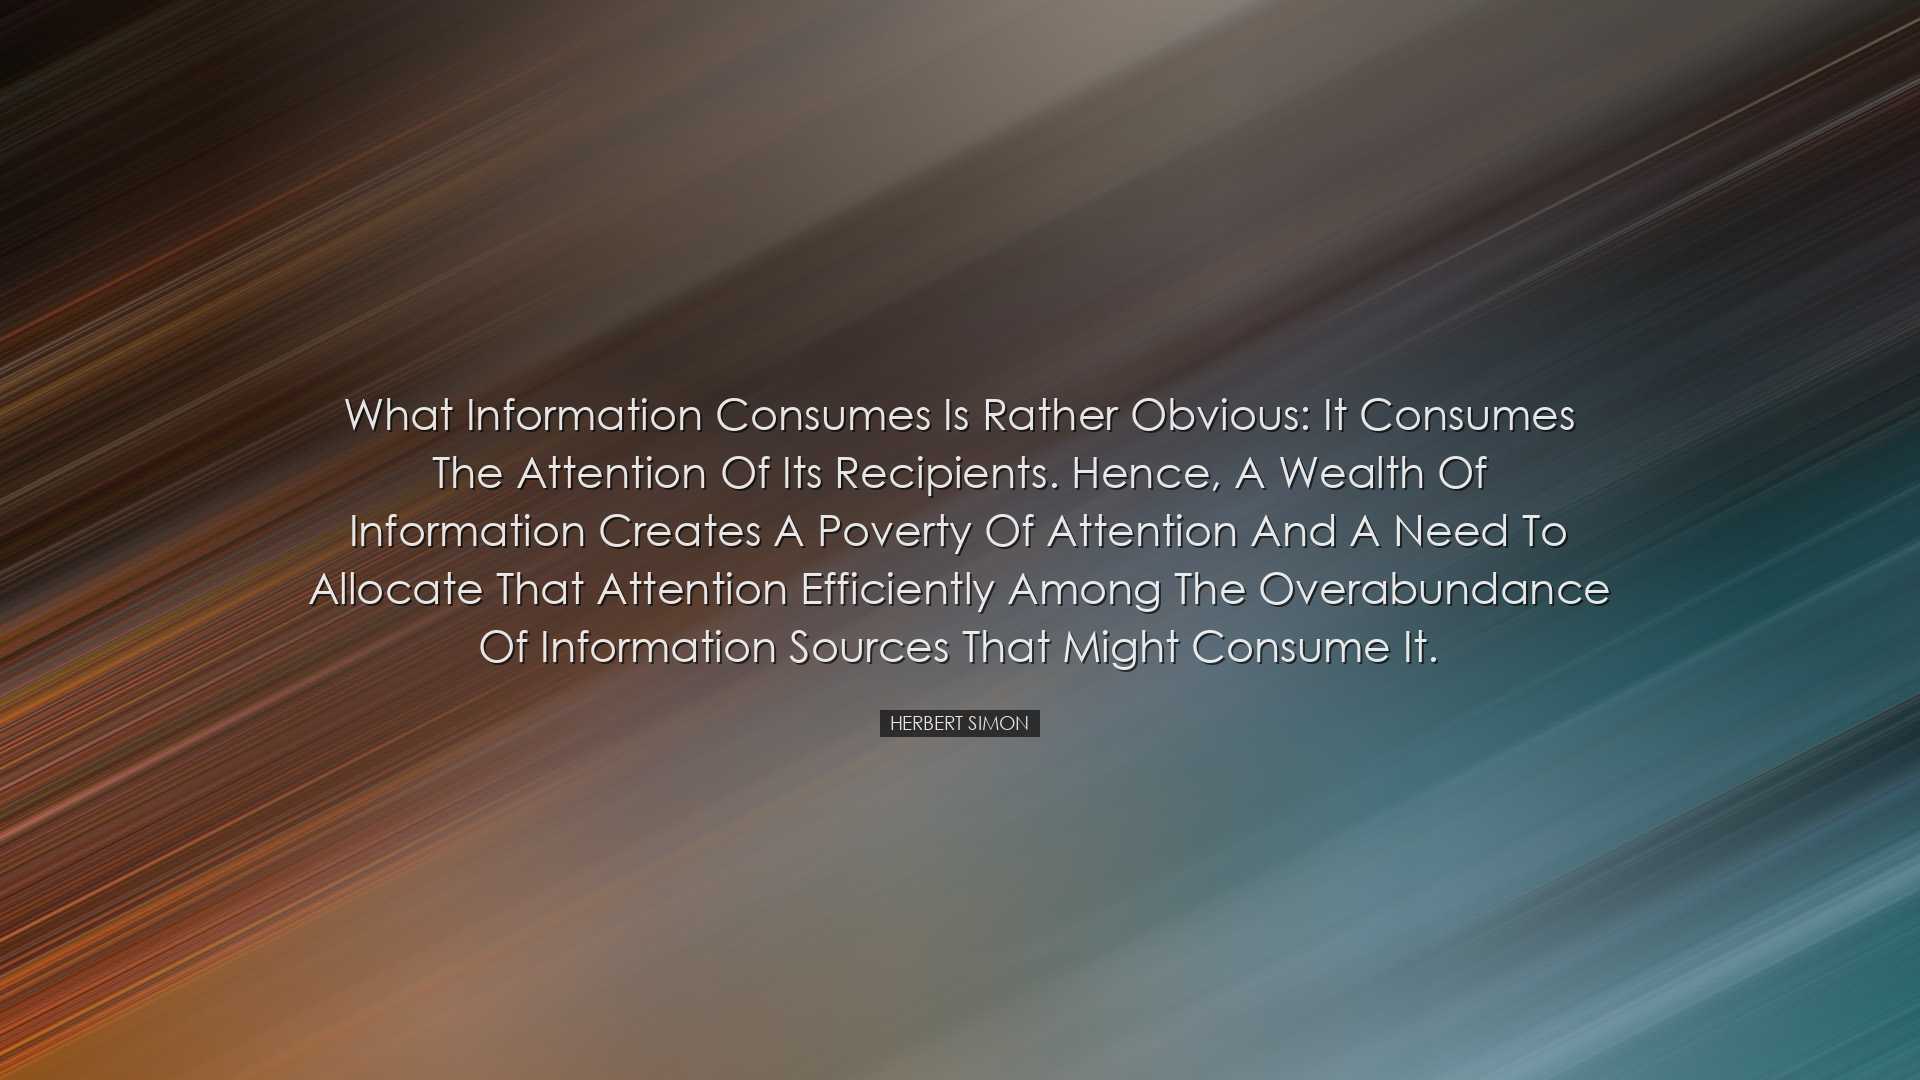 What information consumes is rather obvious: it consumes the atten